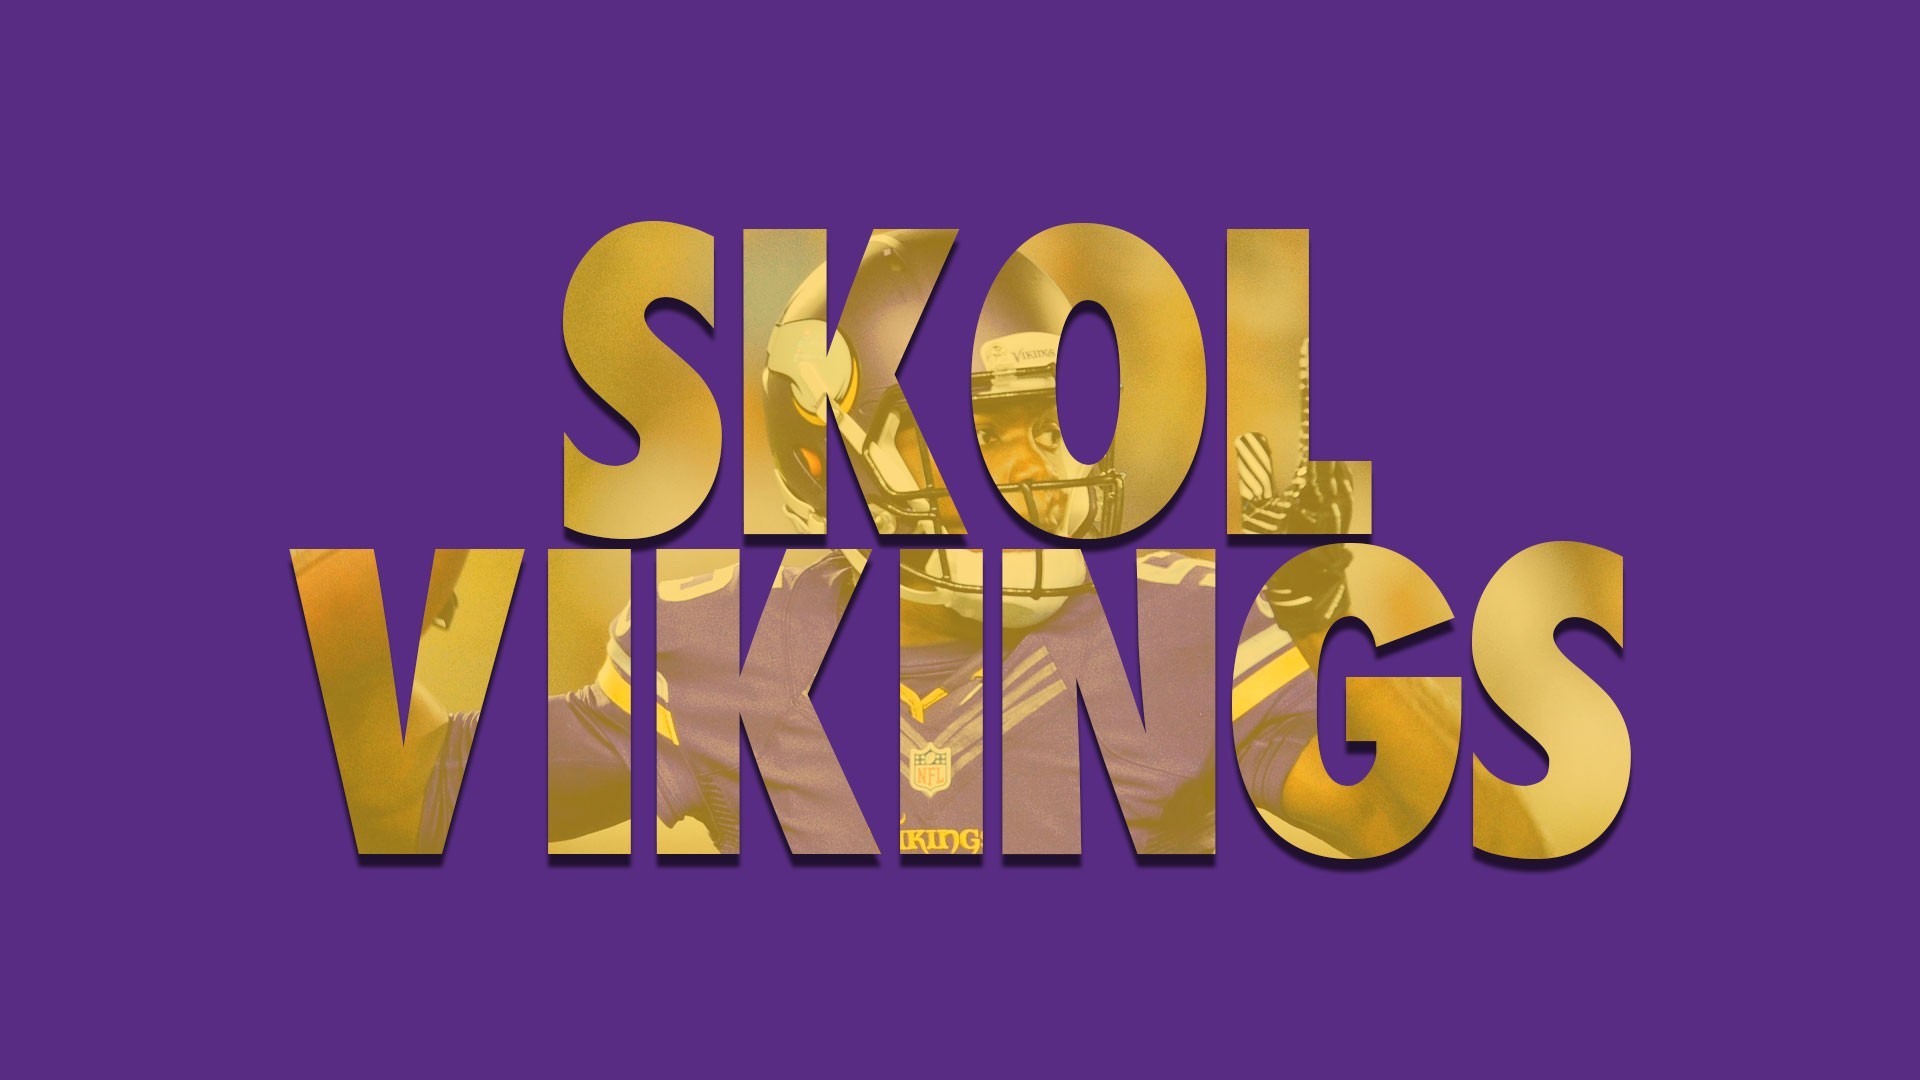 1920x1080 Wallpaper Desktop Minnesota Vikings HD with resolution  pixel. You  can make this wallpaper for